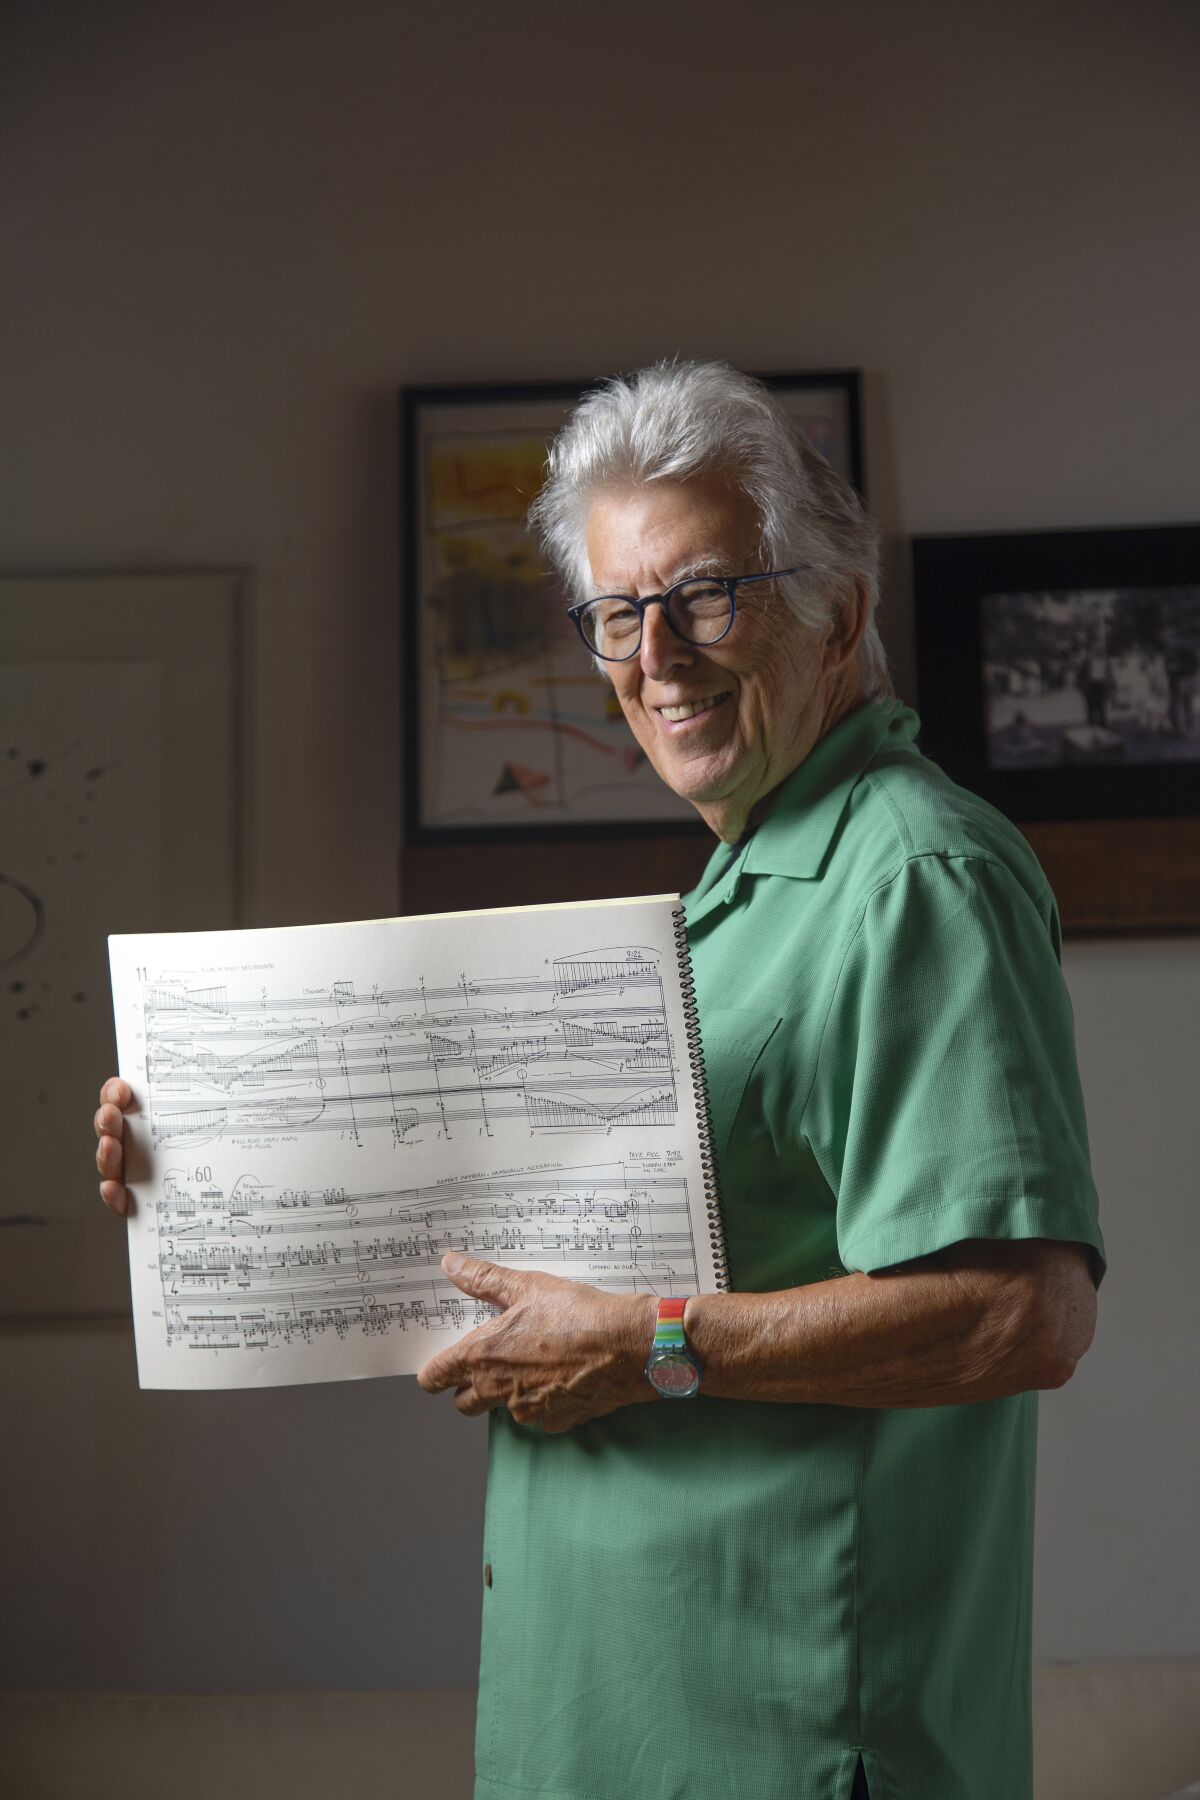 Pulitzer Prize-winning classical music composer and UC San Diego professor Roger Reynolds is shown at his home in Del Mar. Recalling his first year of teaching at UCSD, he says: "The students smoked pot in class and brought their dogs!"